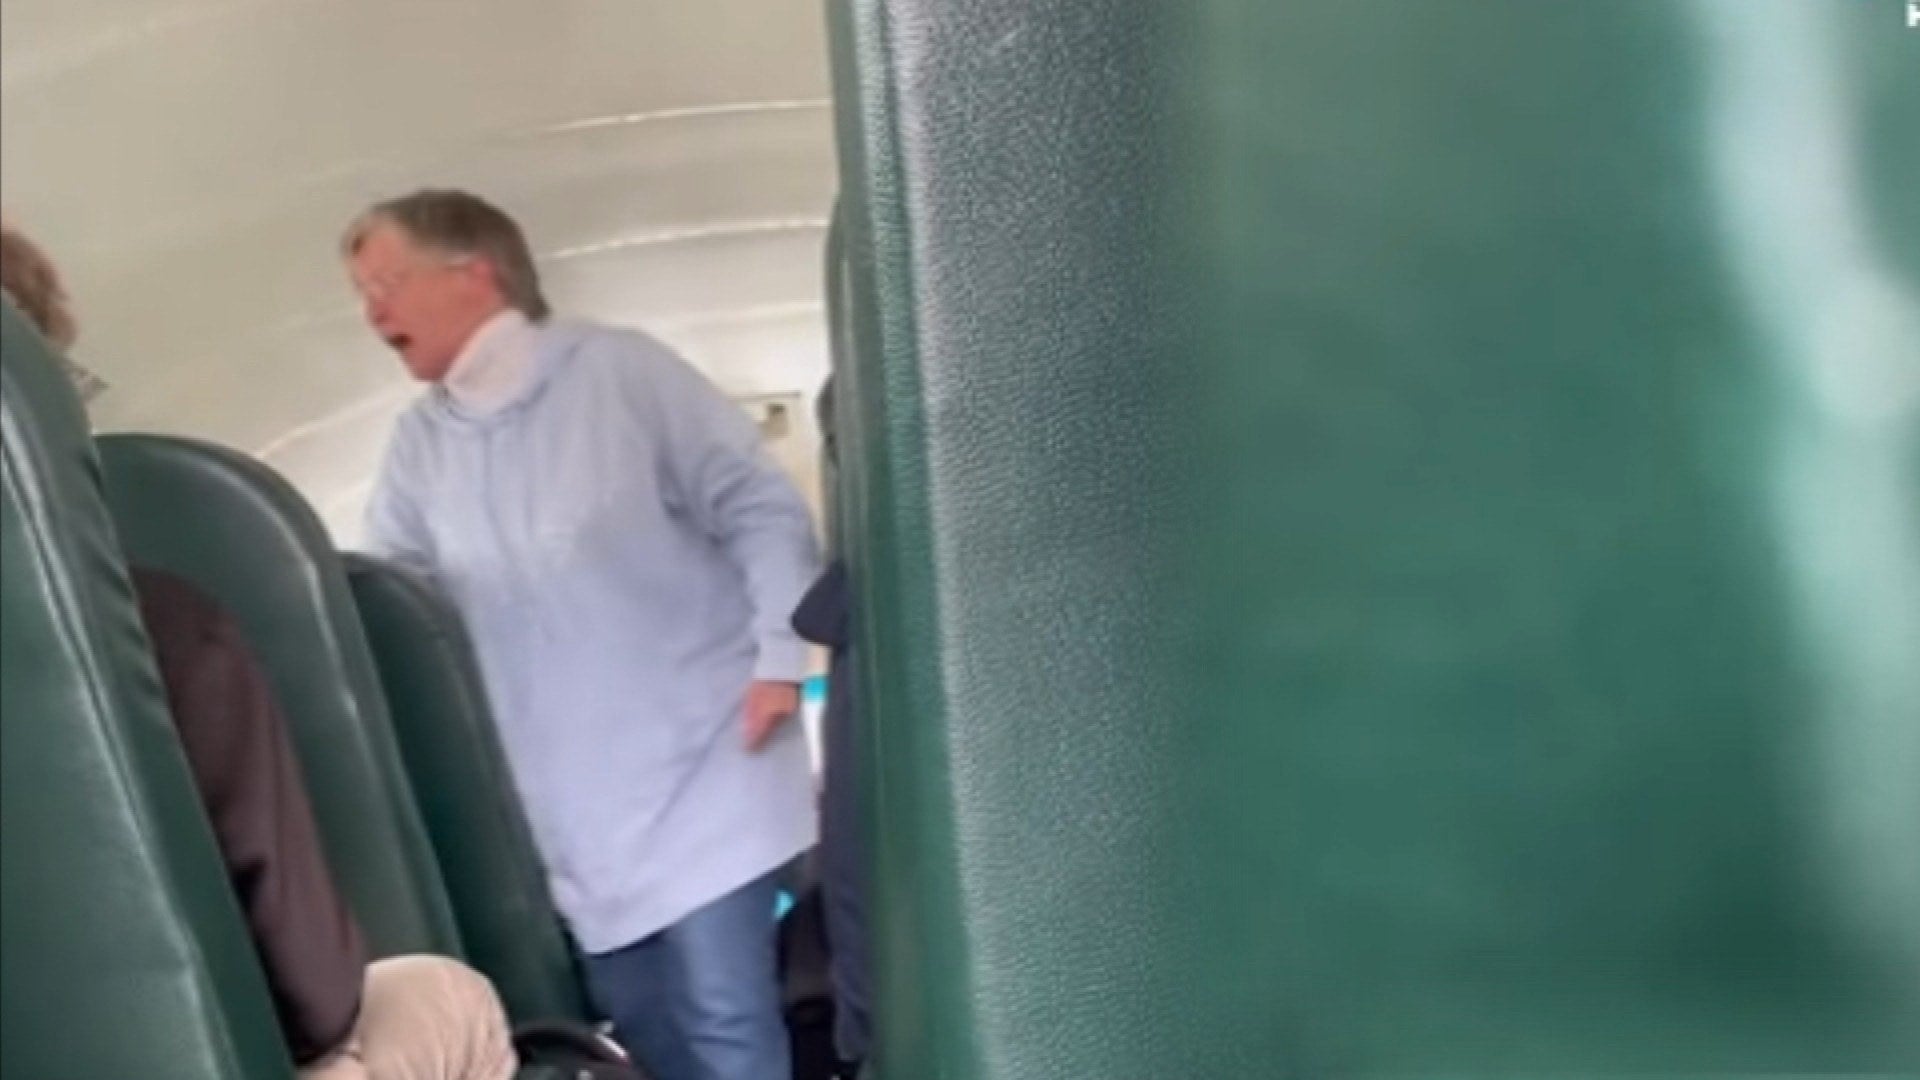 School Bus - Ohio School Bus Driver Quits After Yelling at Students Over Spraying  Perfume | Inside Edition